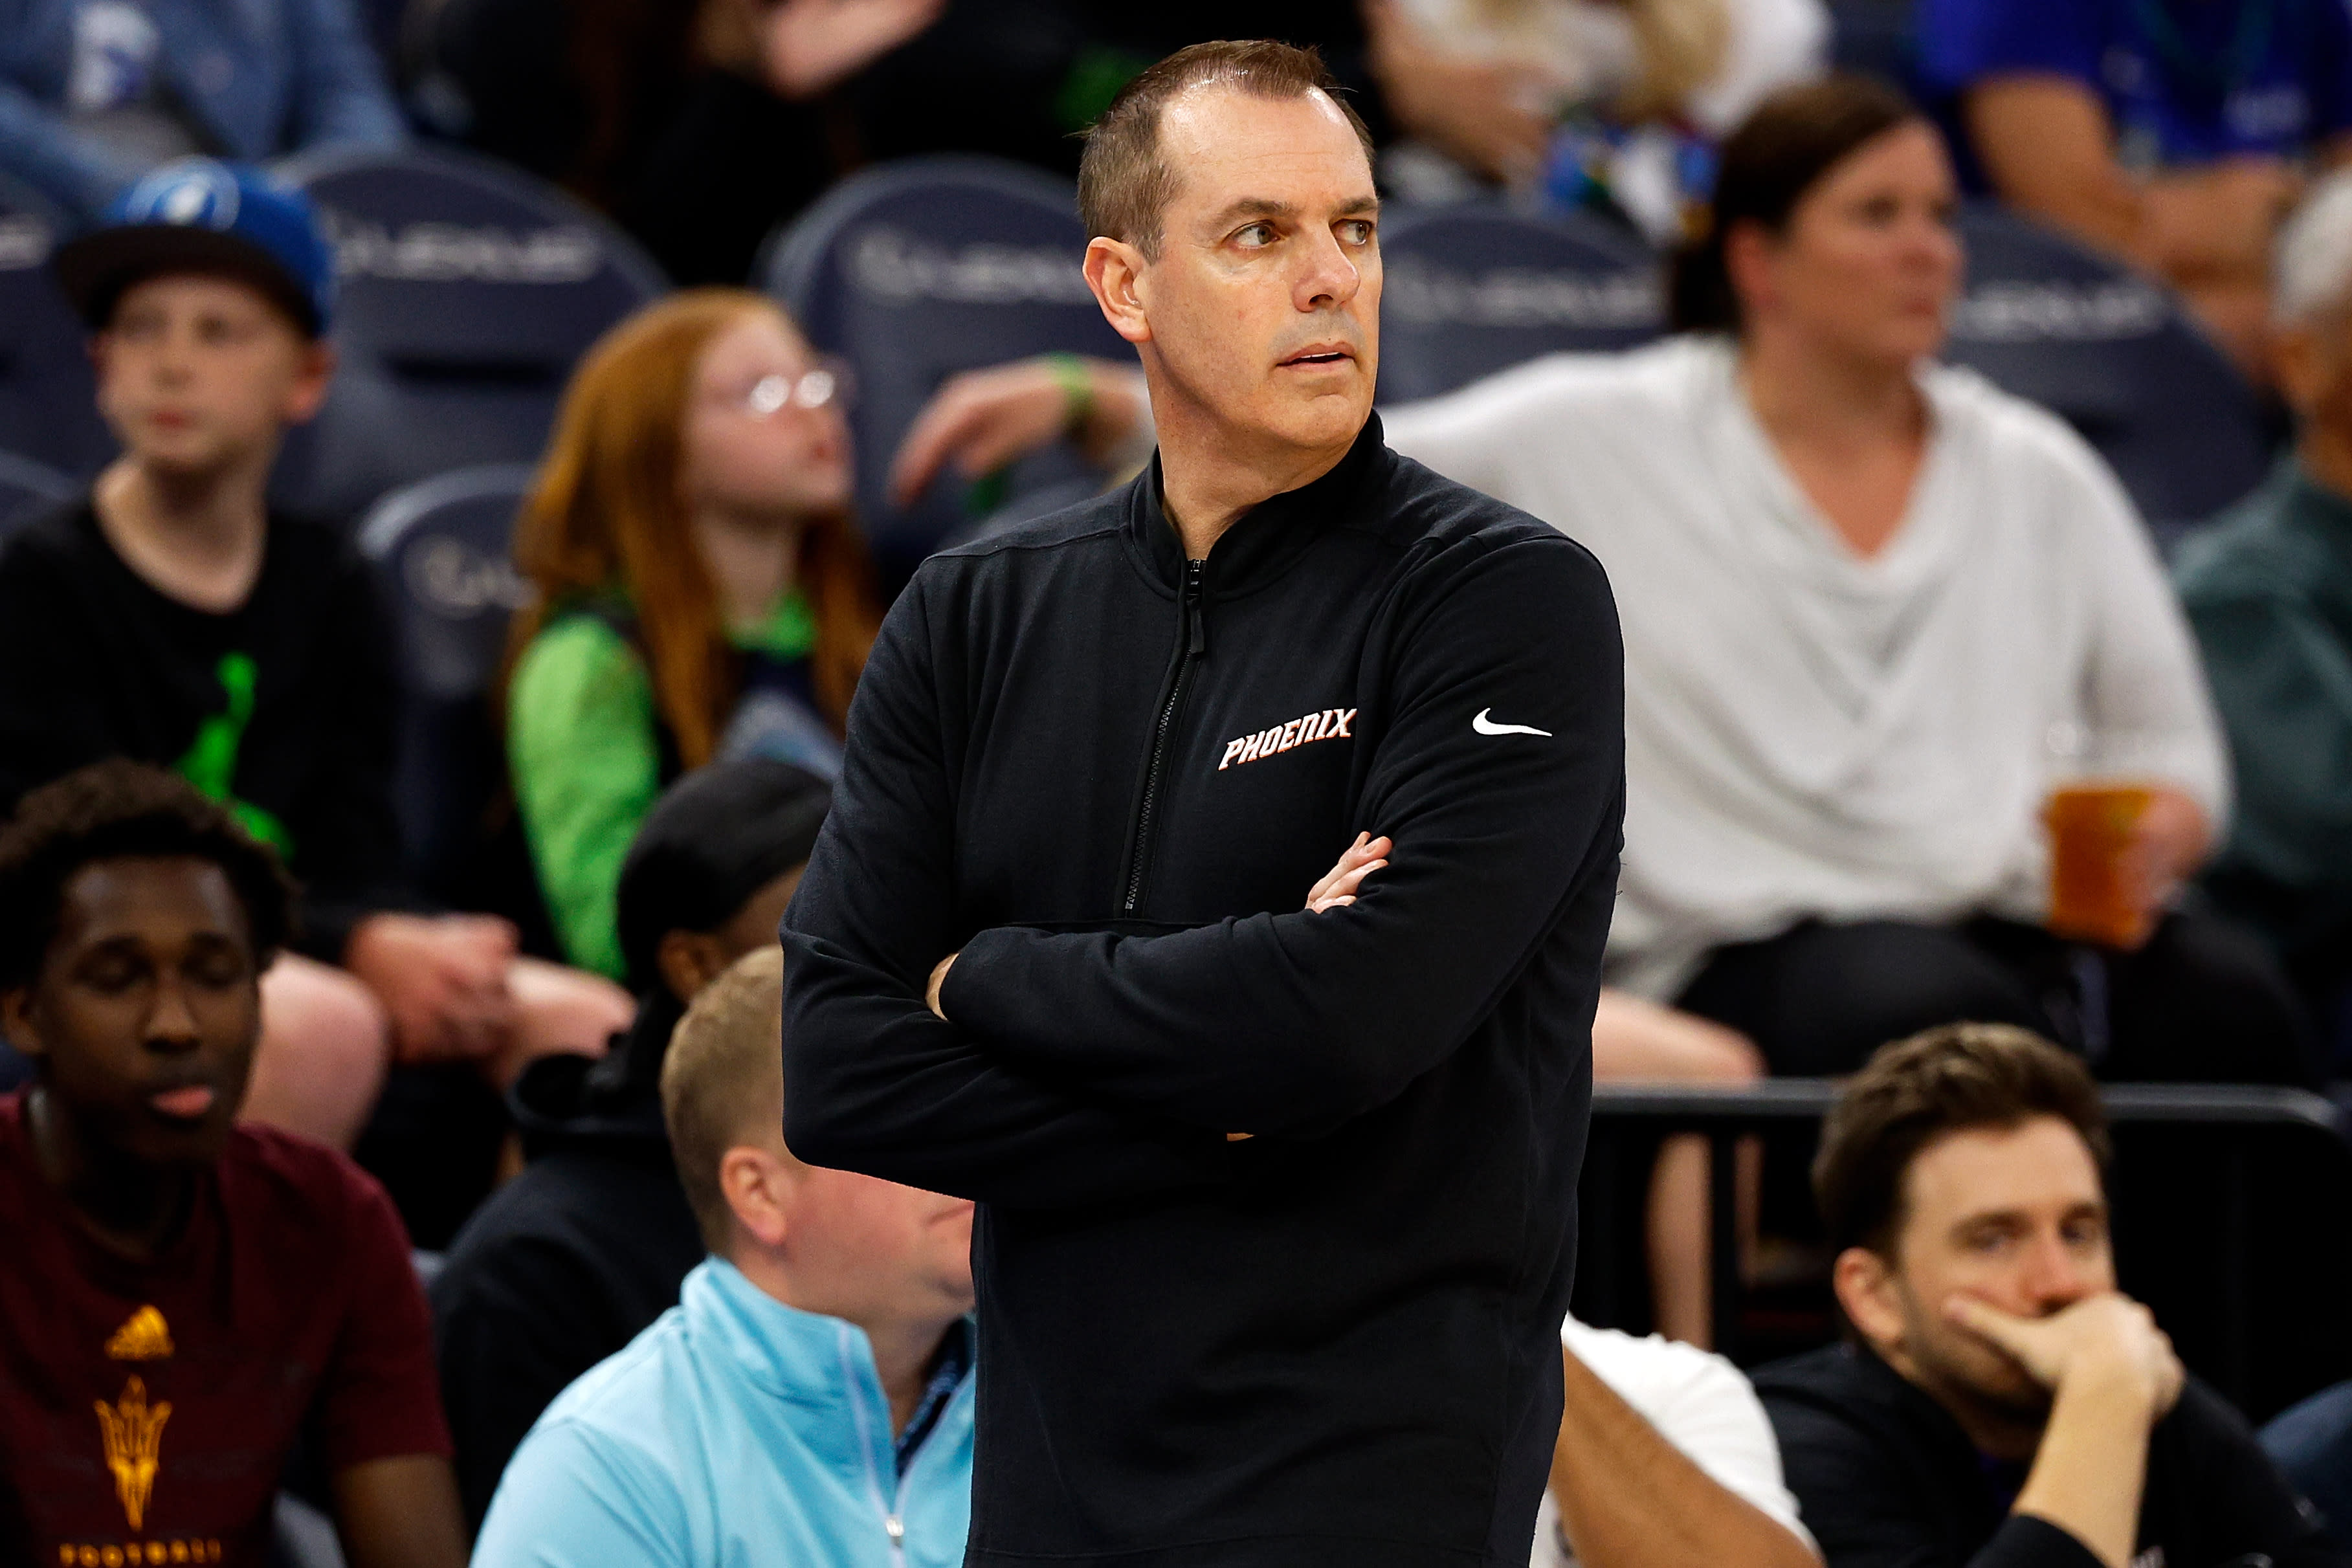 Report: Suns fire head coach Frank Vogel after 1st-round playoff sweep, eyeing Mike Budenholzer as replacement